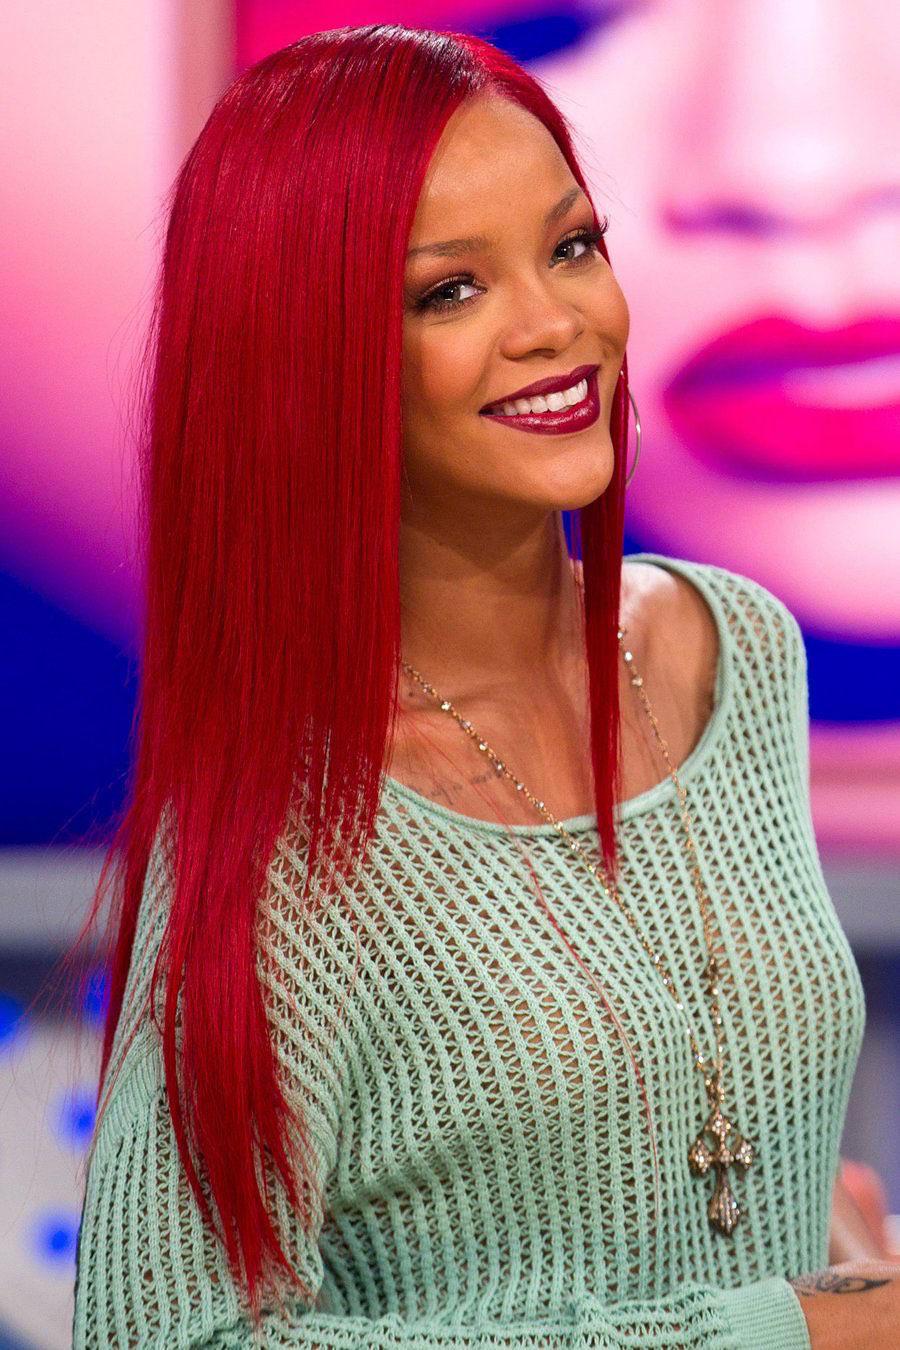 I miss her red hair : Rihanna